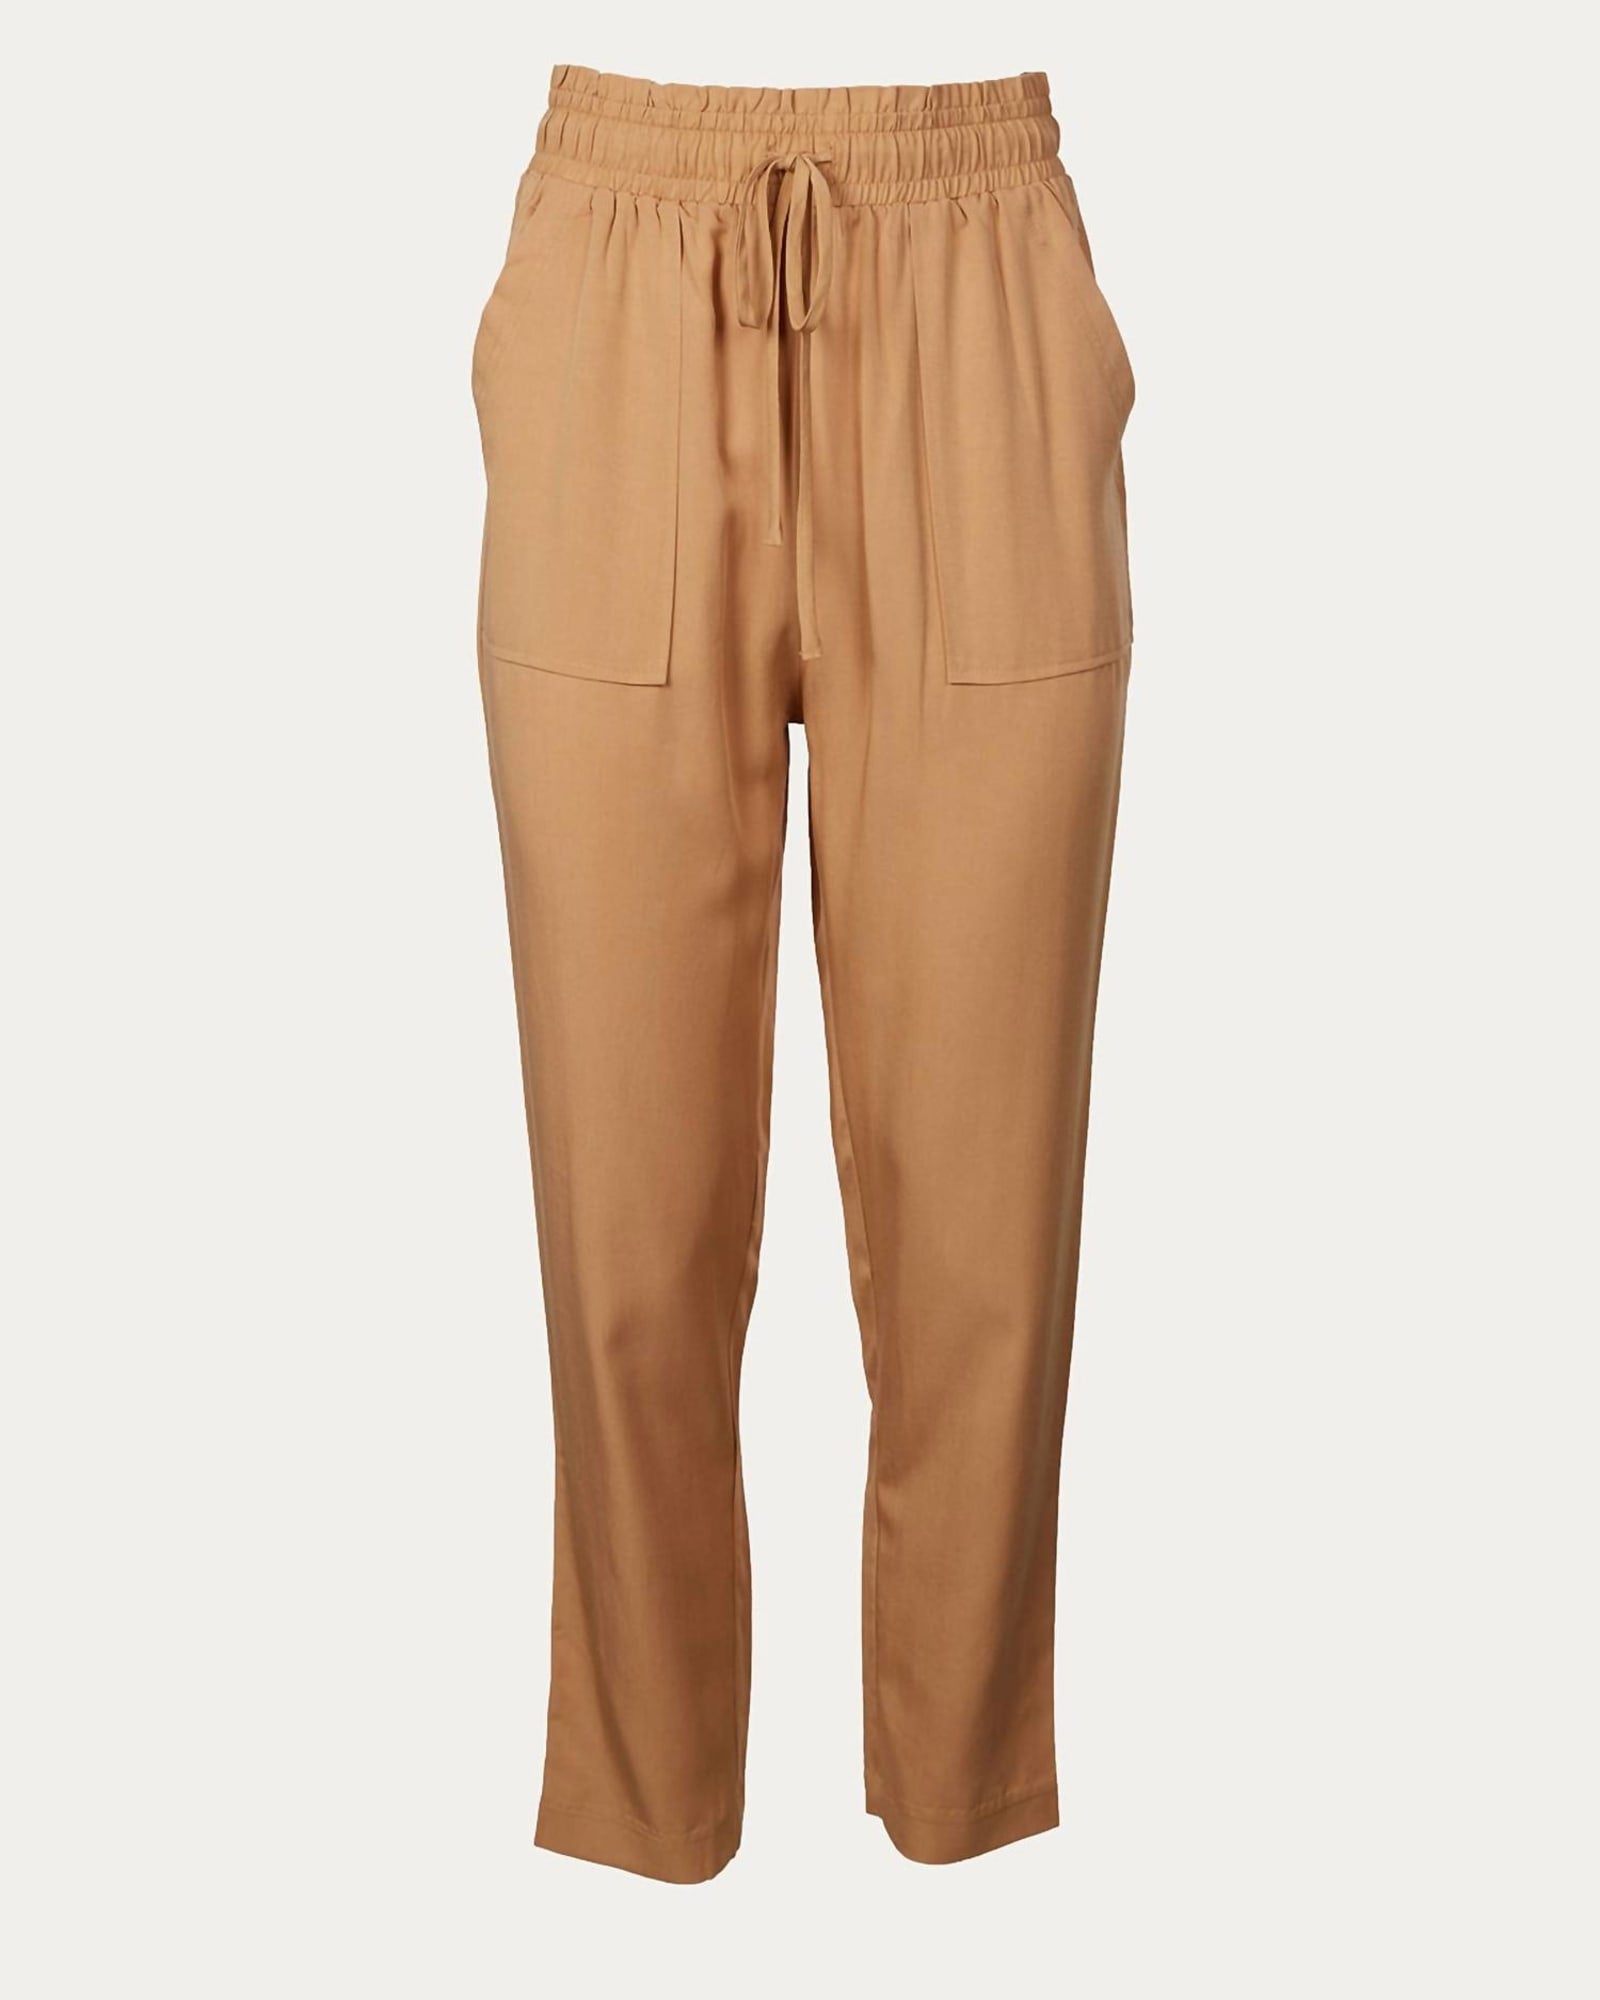 Paperbag Pants in Apricot | Apricot